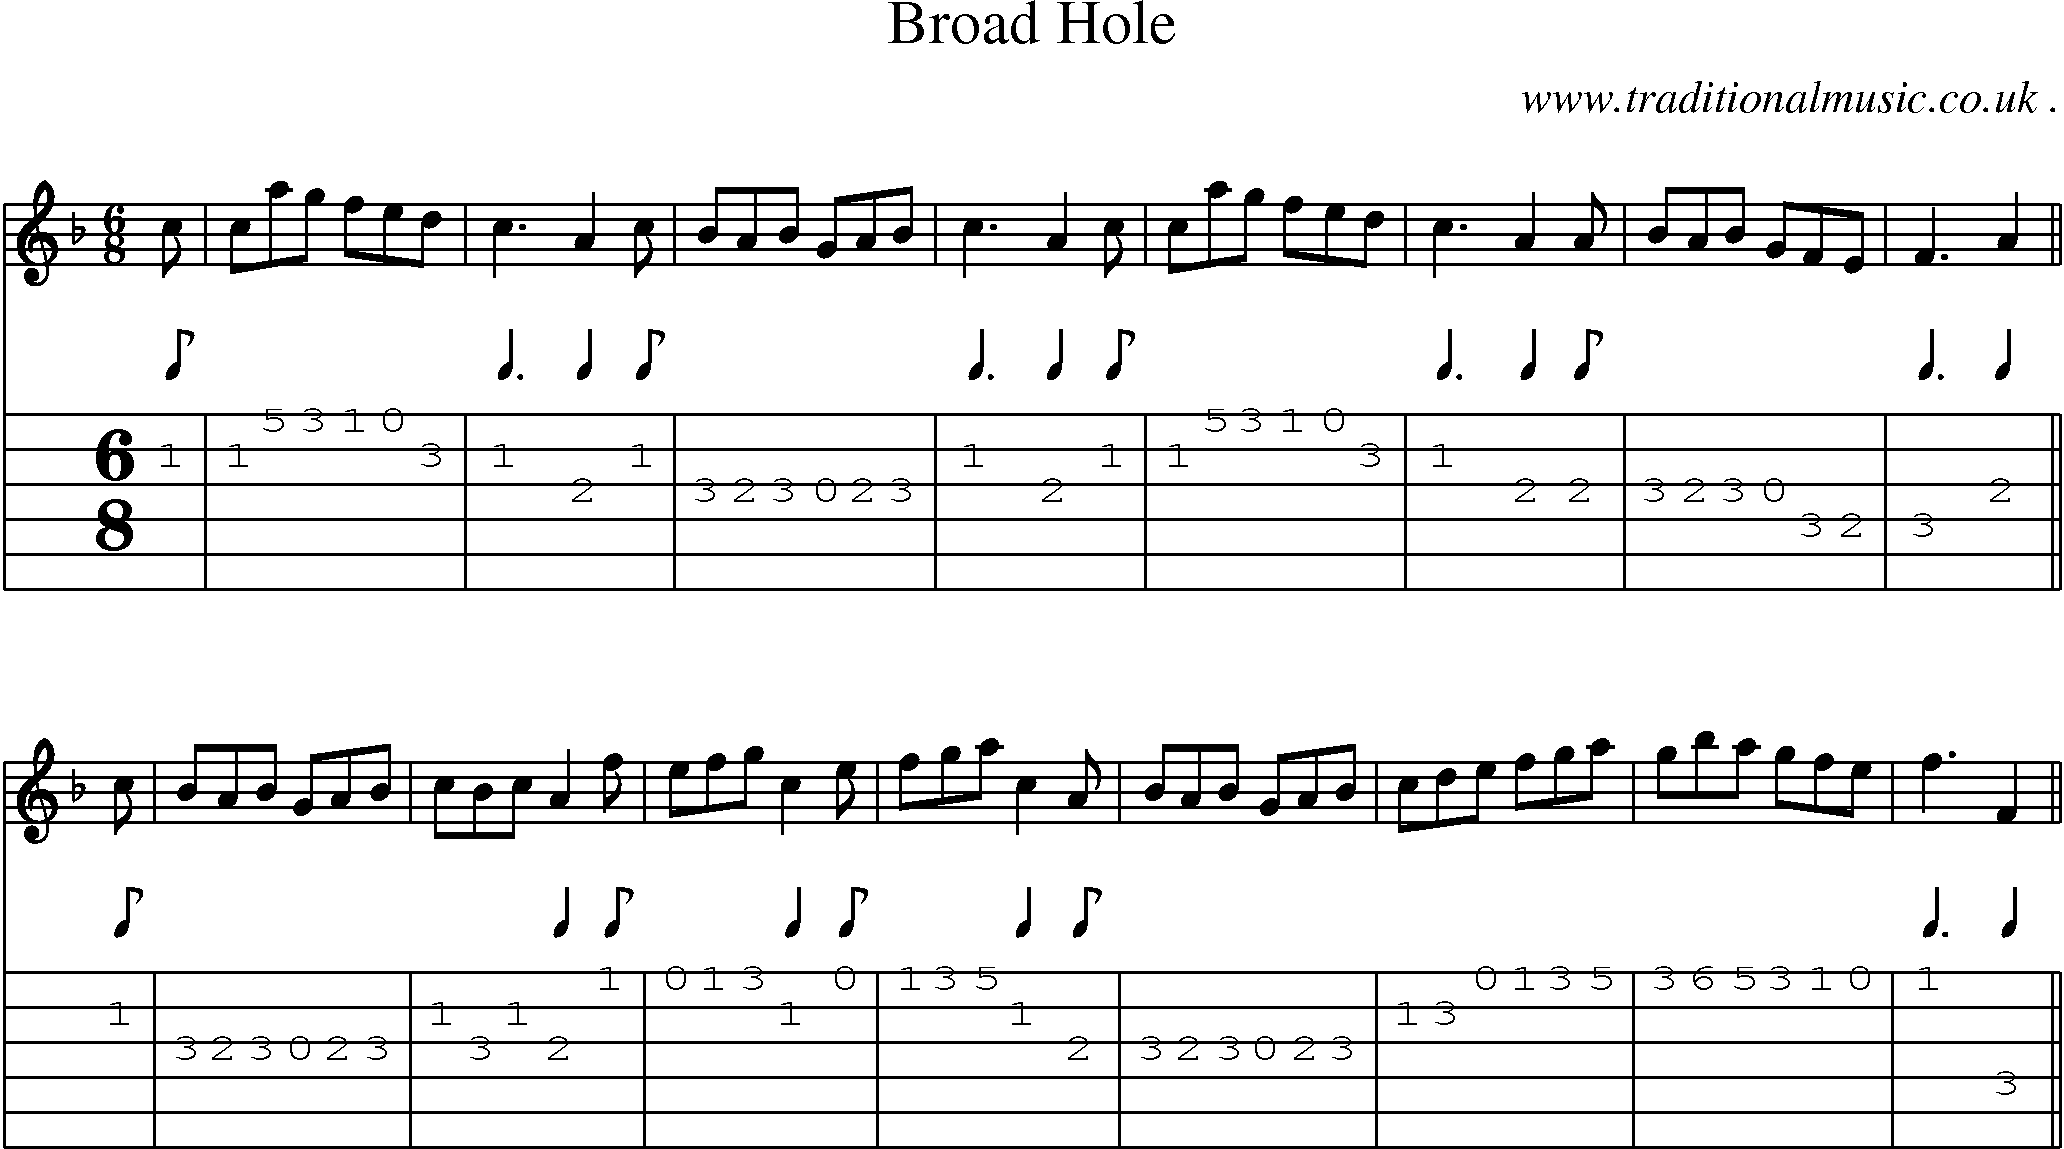 Sheet-Music and Guitar Tabs for Broad Hole